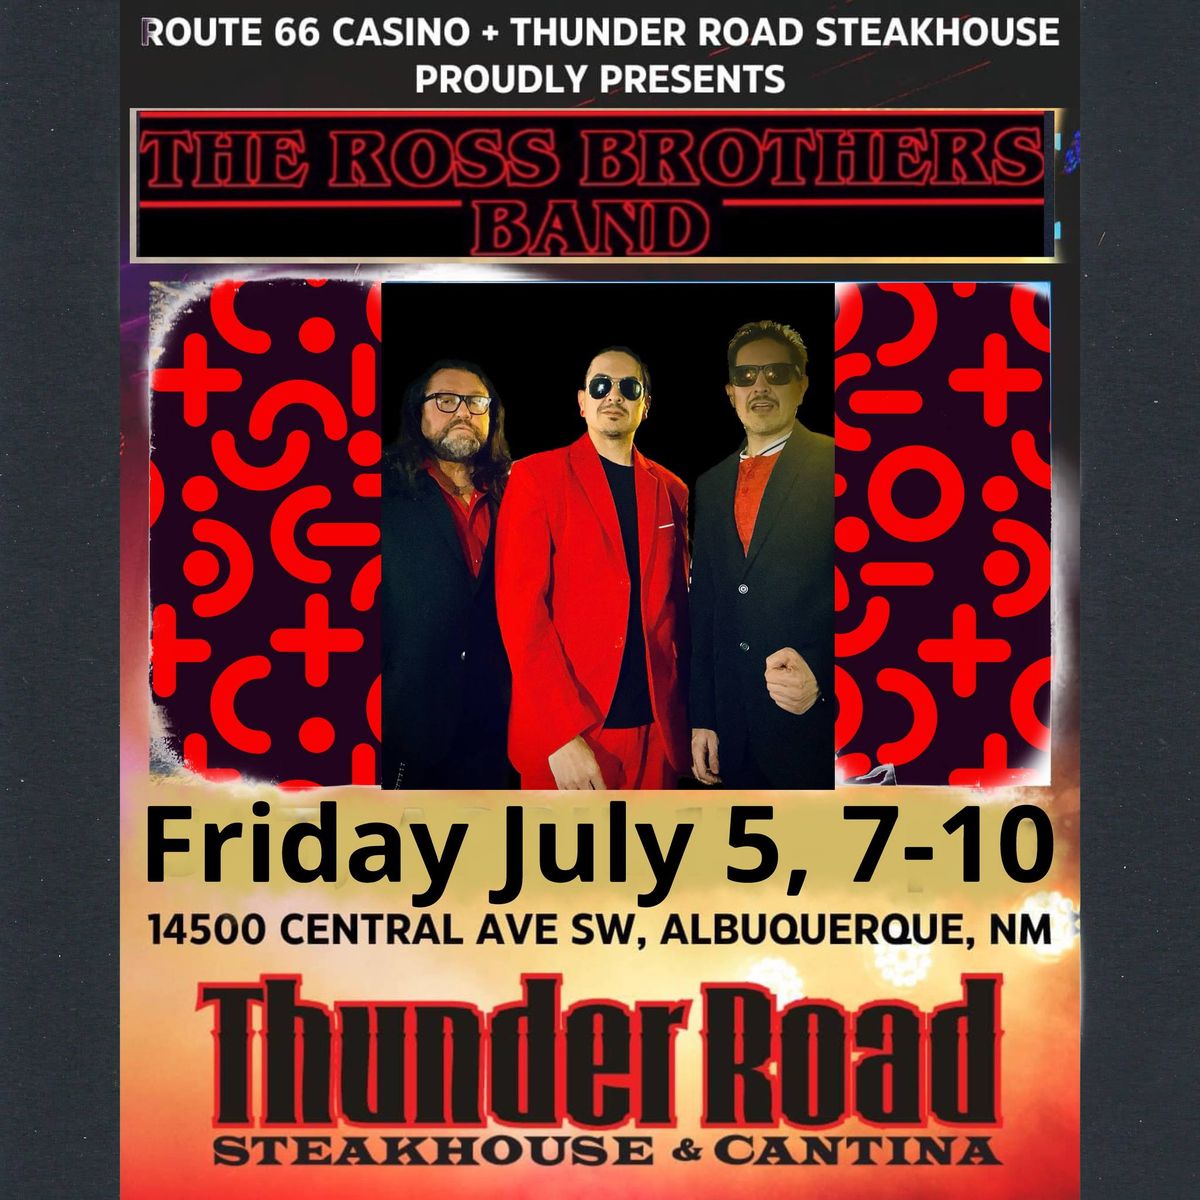 The Ross Brothers Band at Route 66 Casino